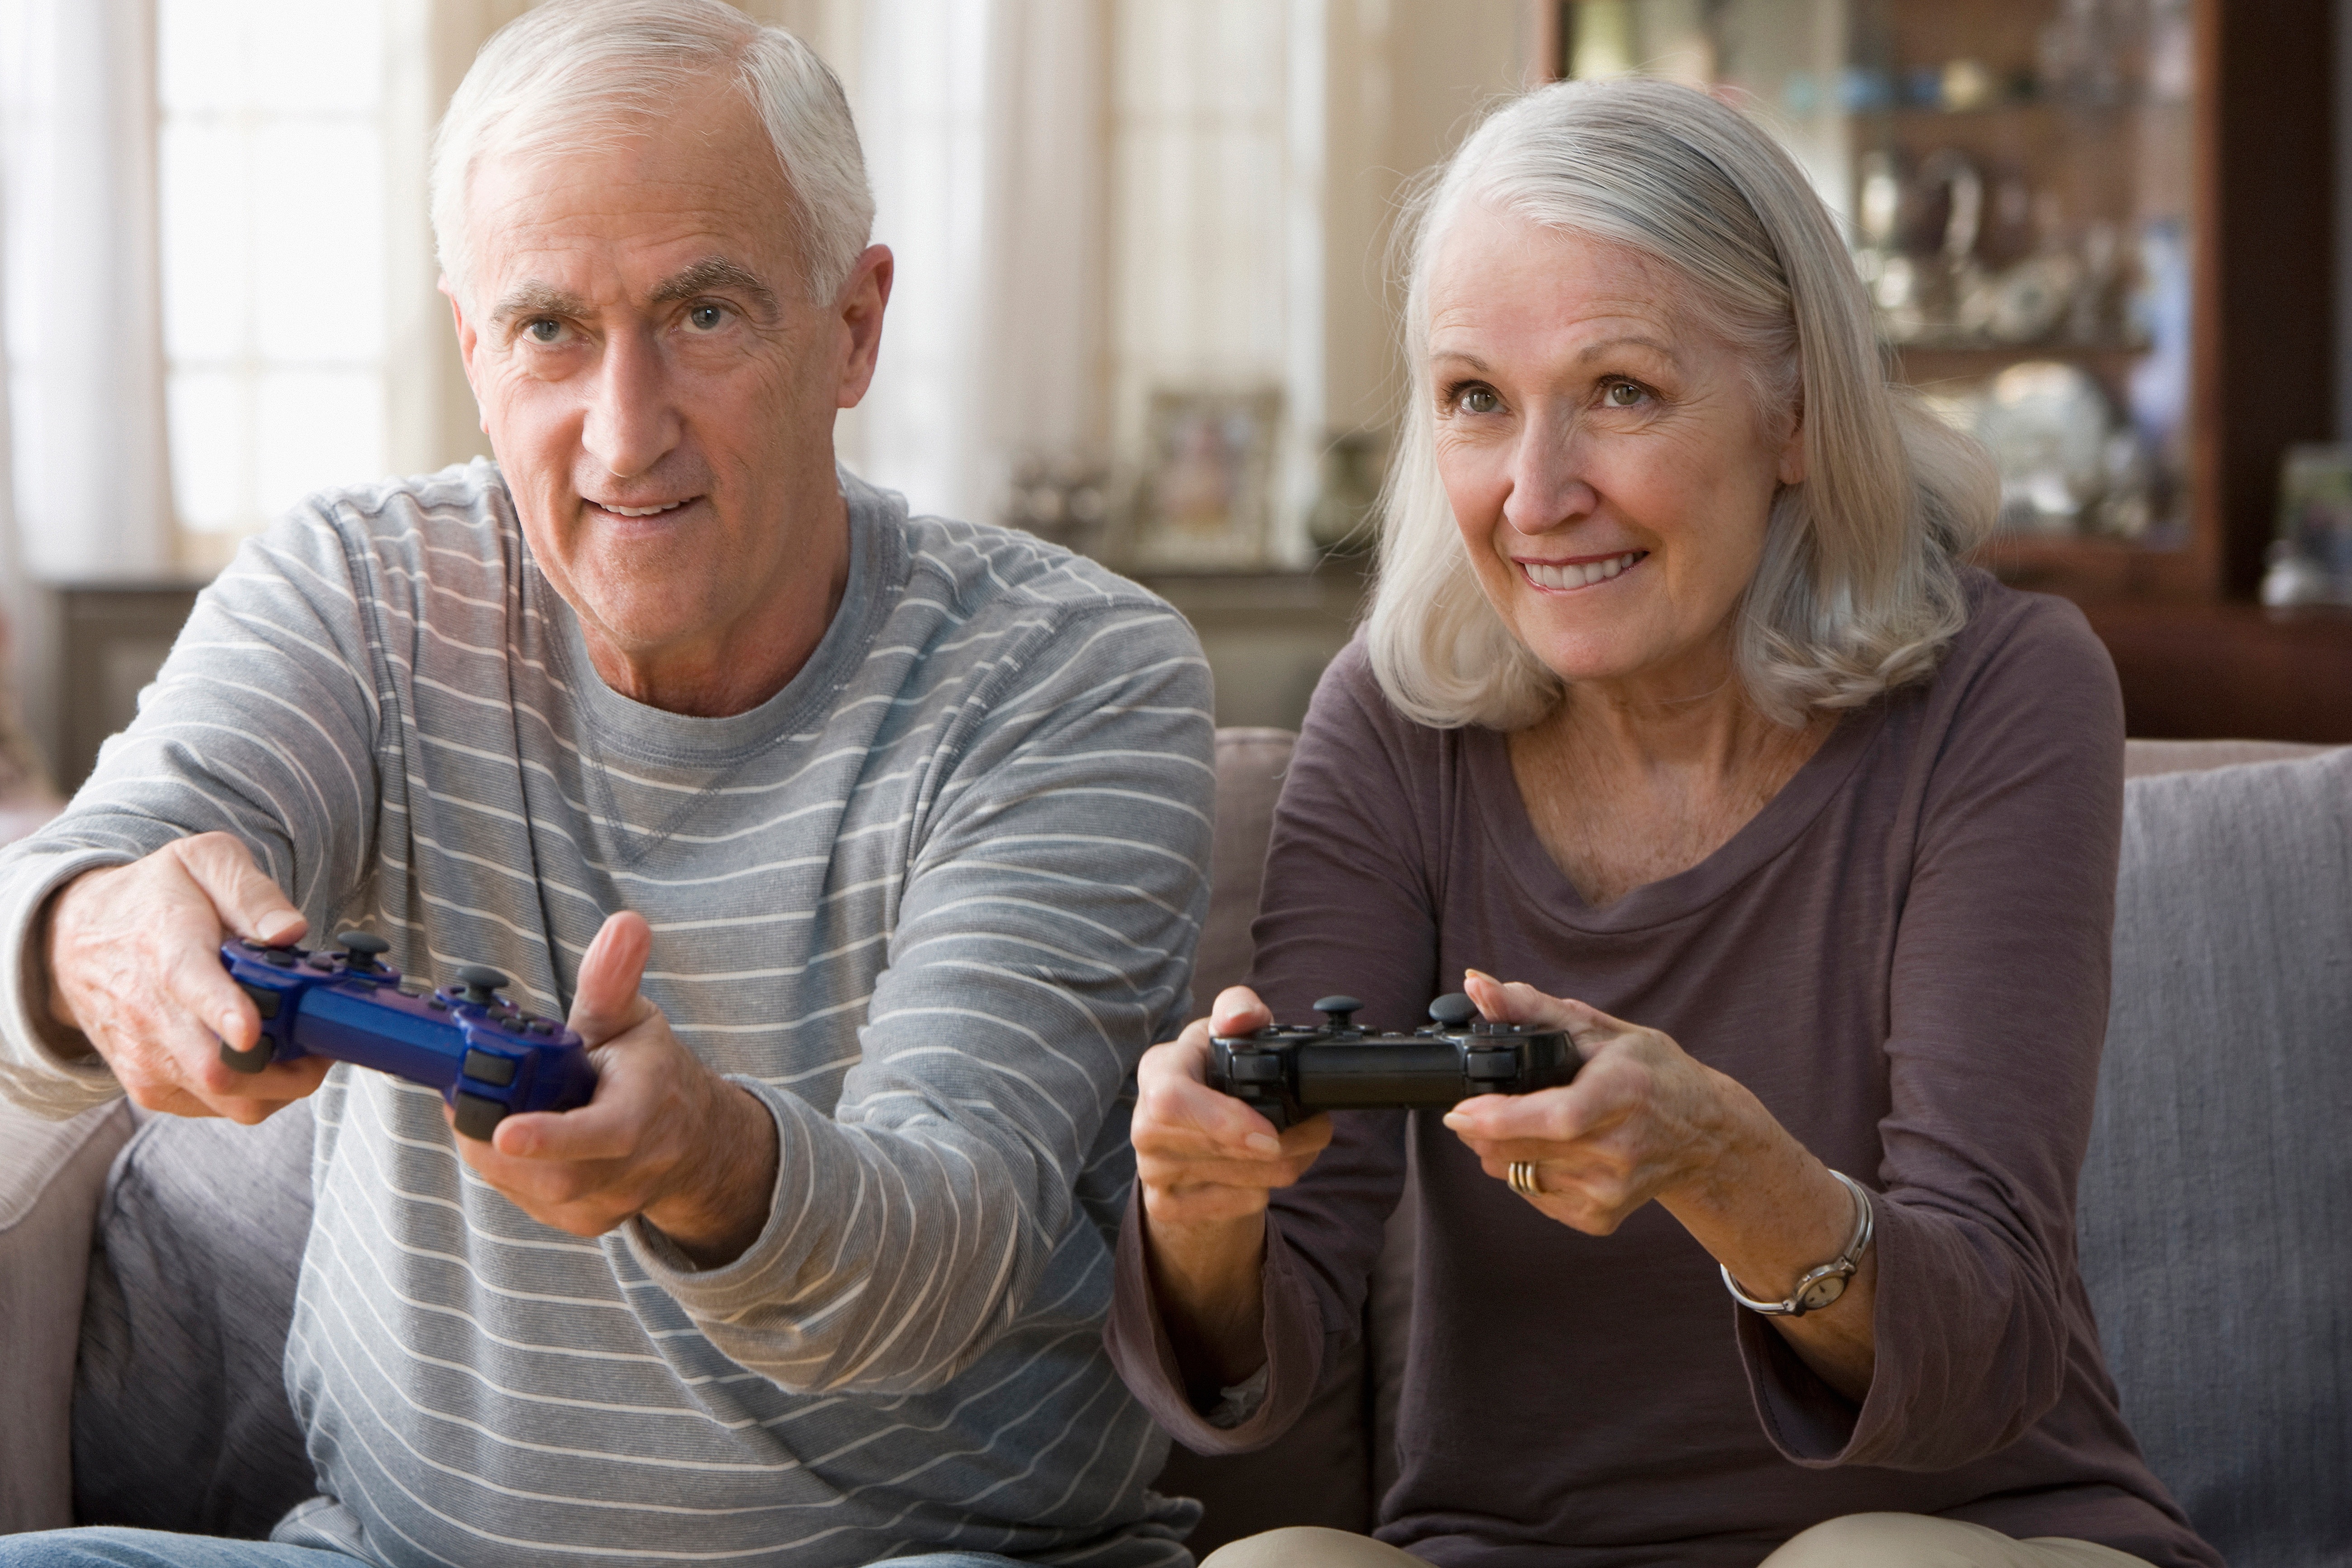 Video Game Slows Down Mental Aging